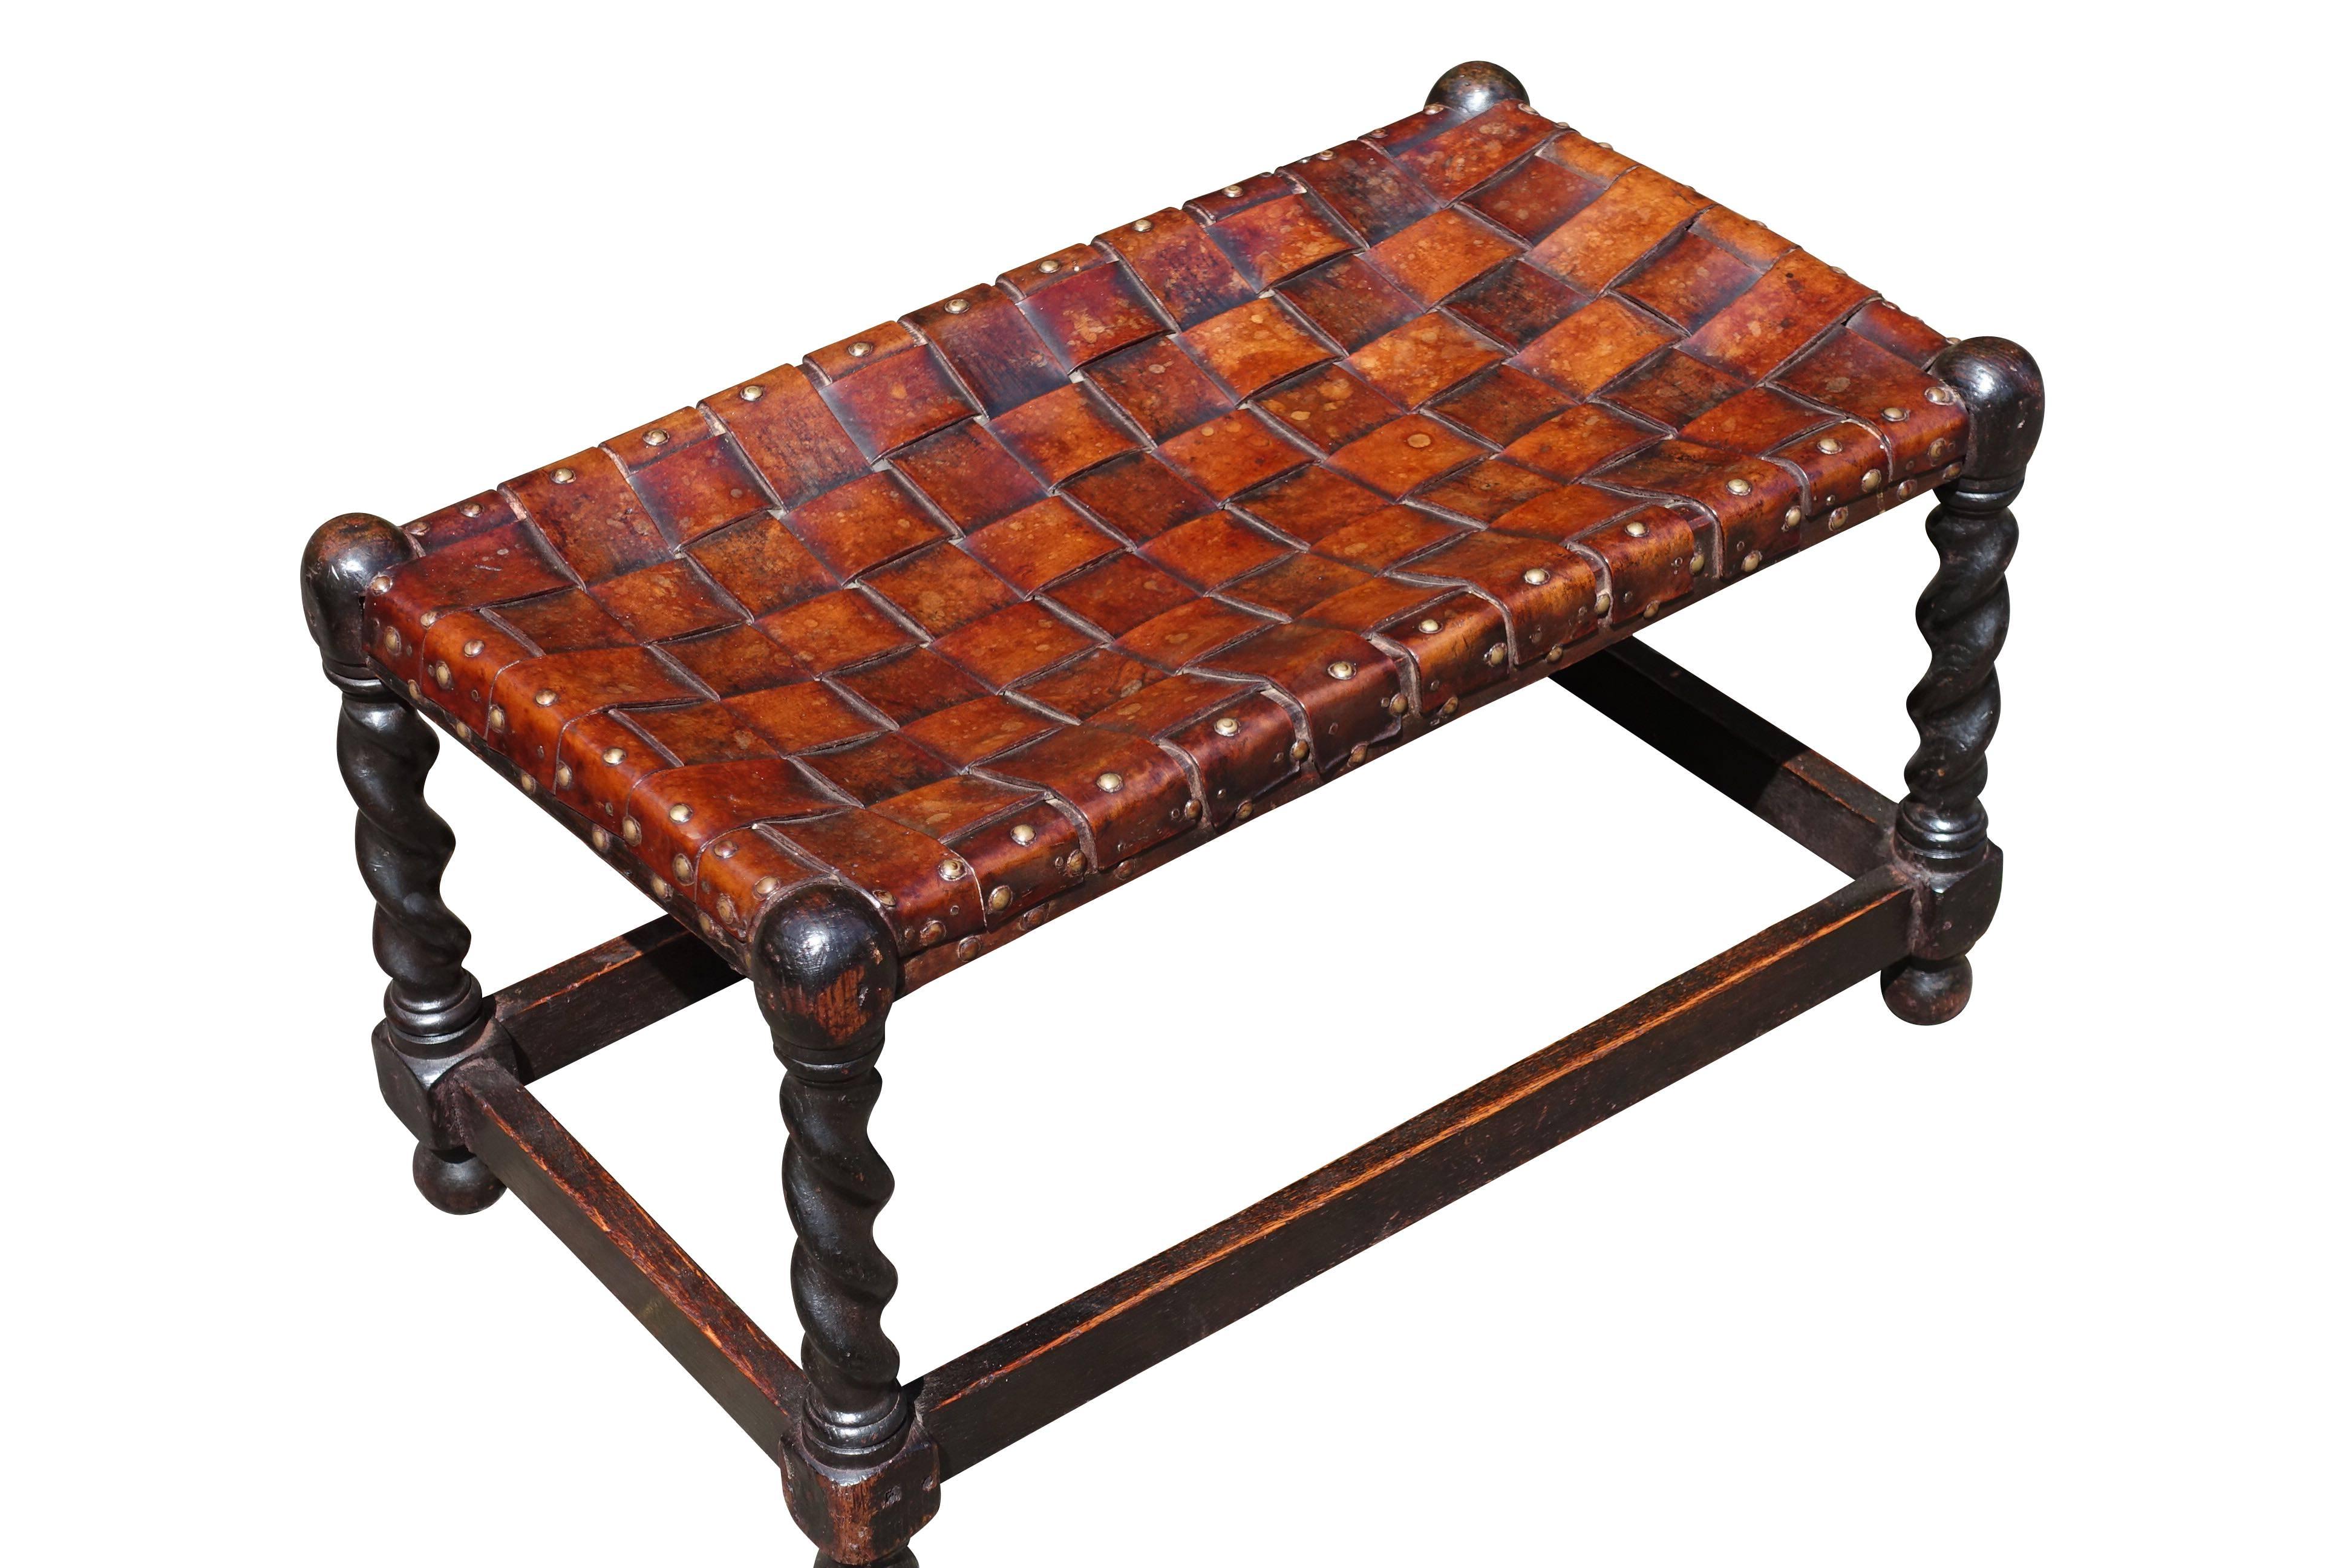 English Classic woven leather foot stool, circa 1860
Walnut with brass tacks.
